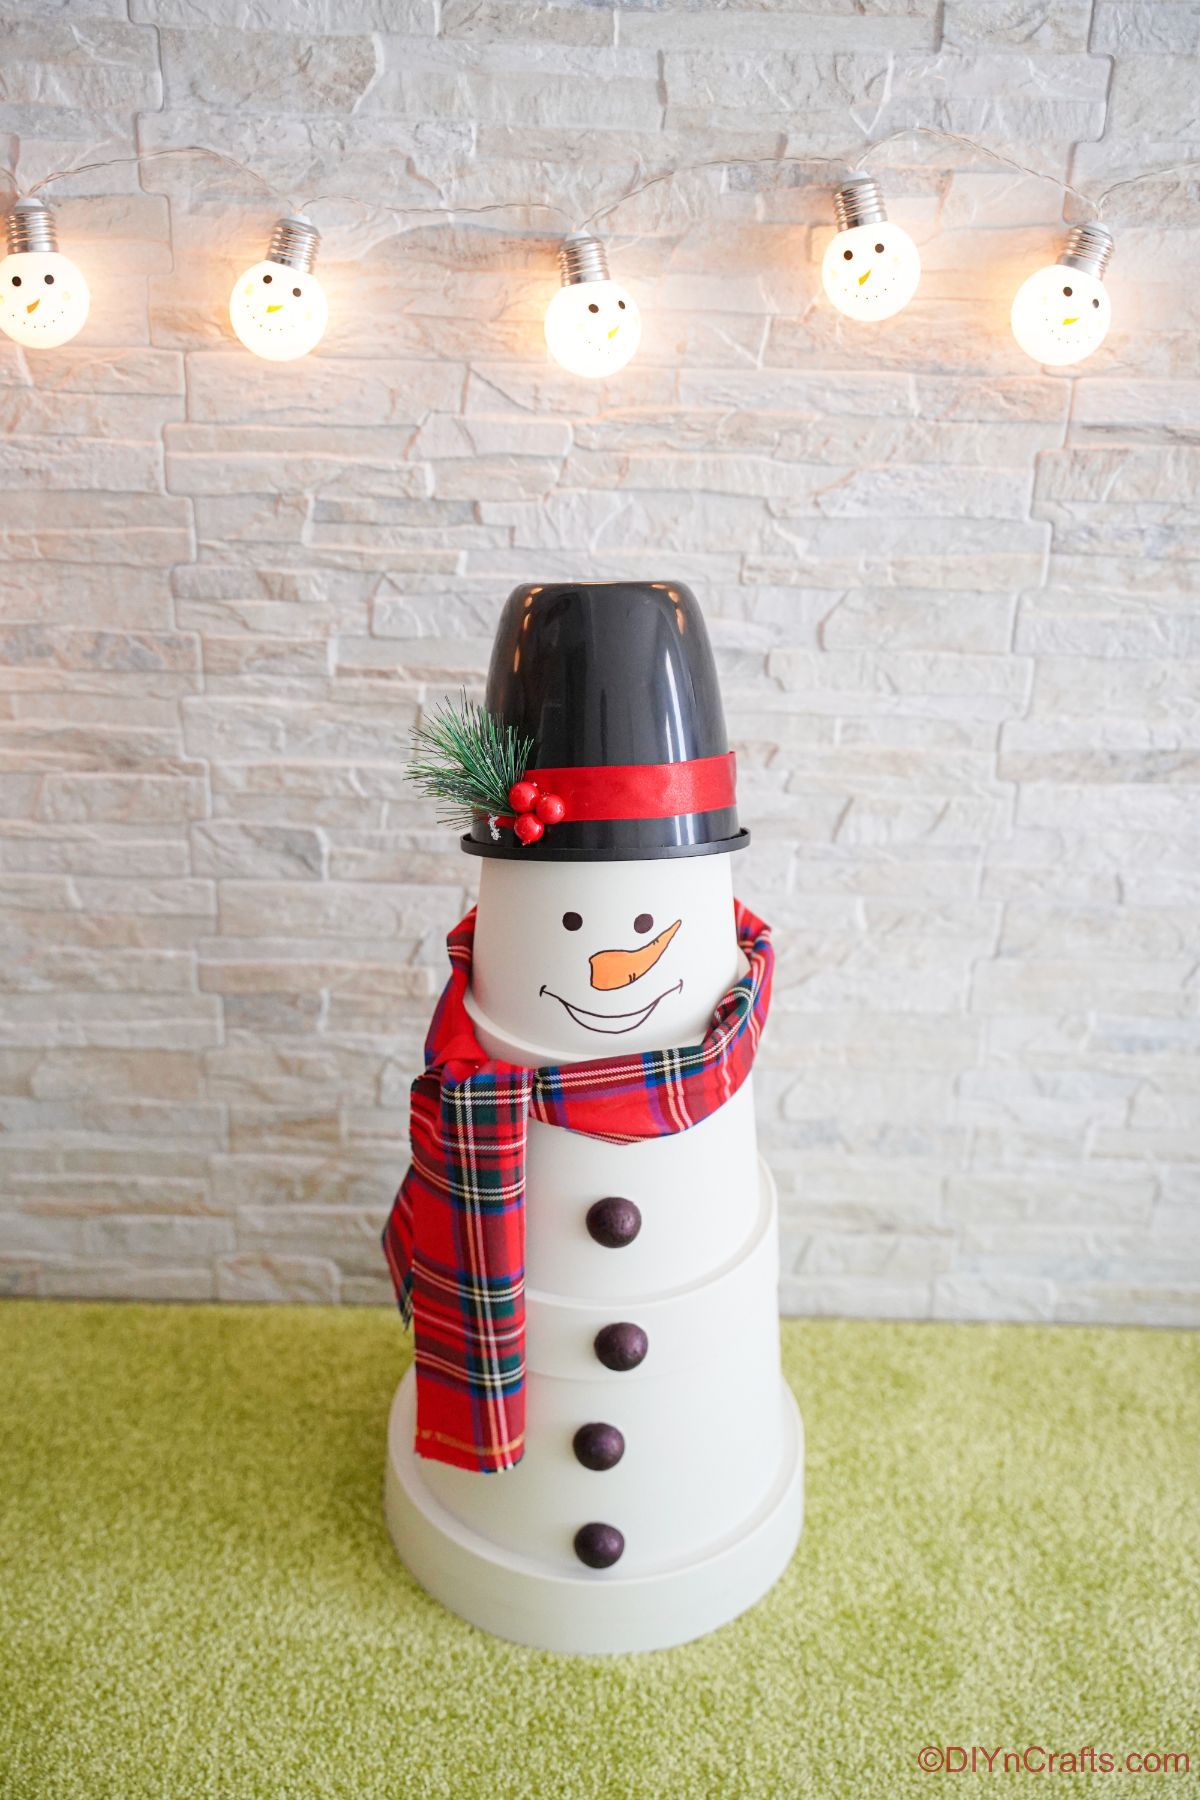 fake snowman on green floor with white brick background and lights hanging against wall